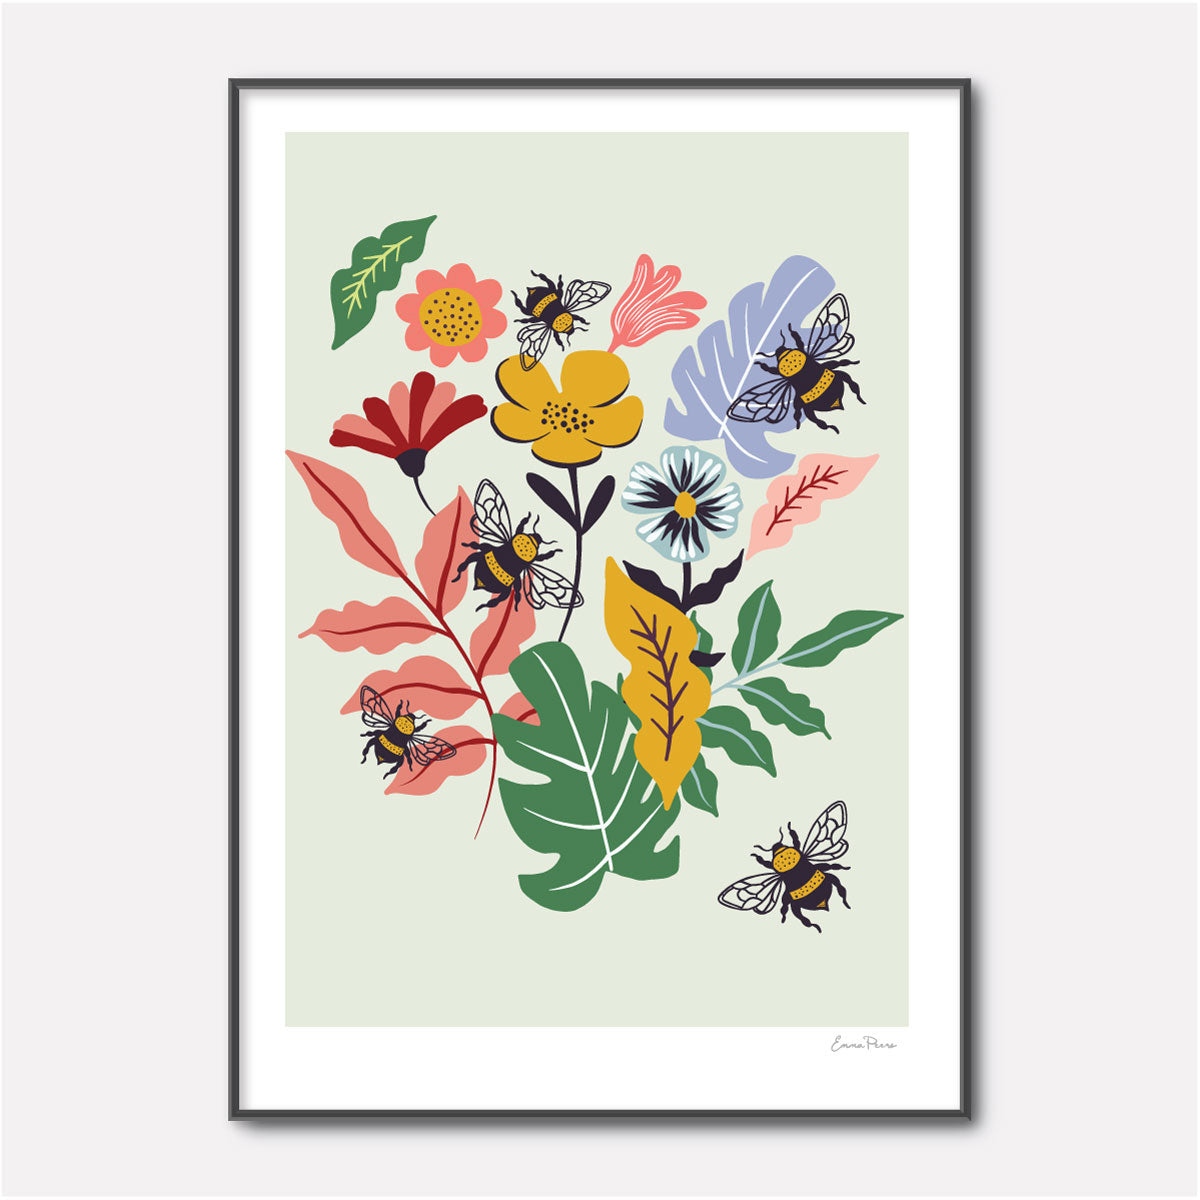 Bumble Bee, plants and flower Illustration print by Emma Peers. Wall art and home decor range.